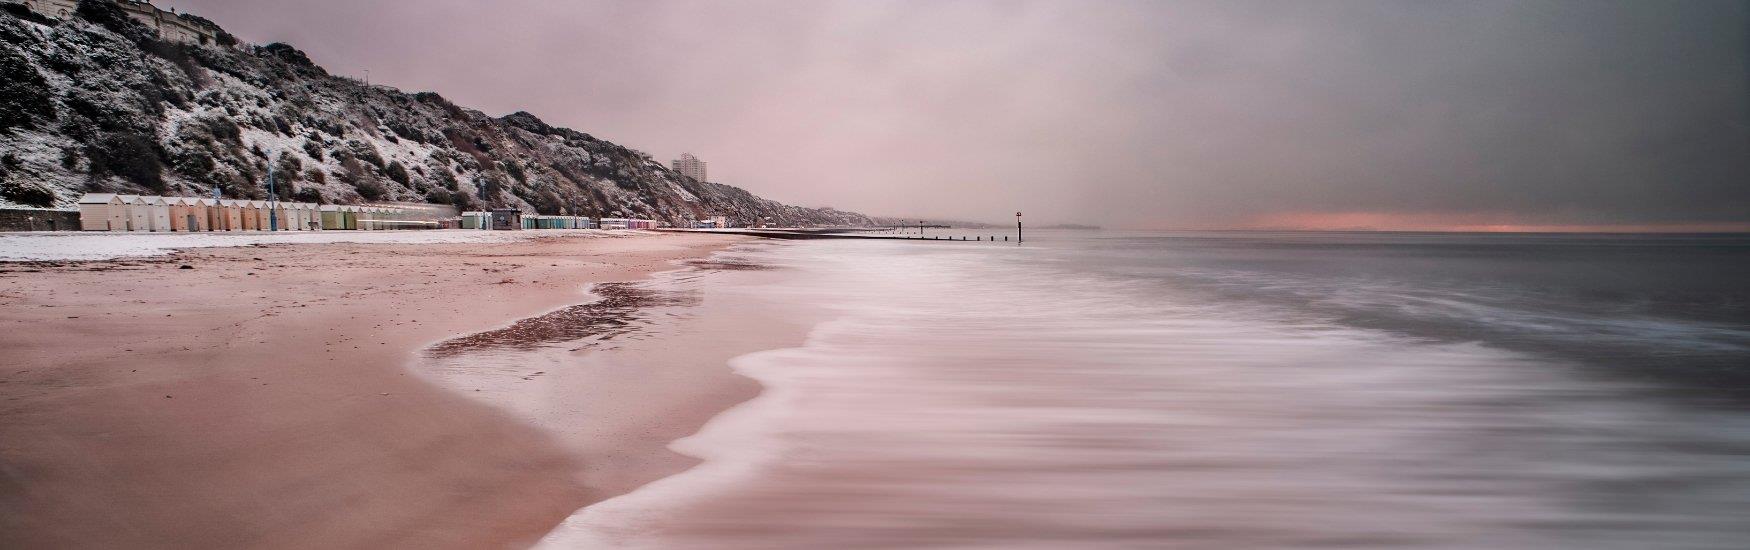 Frosty scenes on a tranquil winters day at Bournemouth Beach